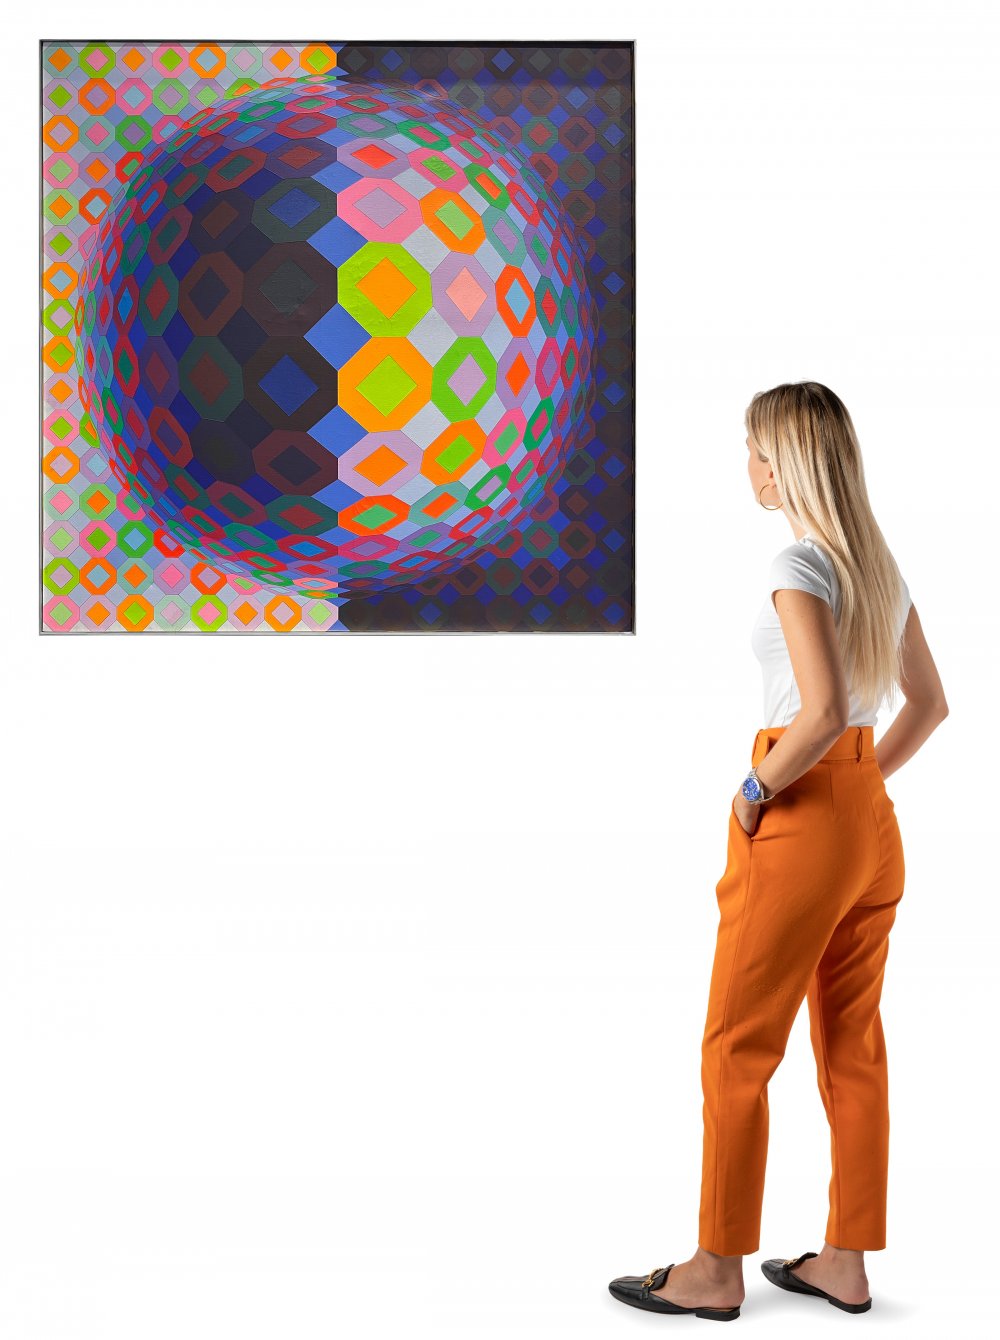 VICTOR VASARELY (Pécs, Hungary, 1908 - Paris, 1997)."Multicheyt", 1973Oil on canvas.Signed in the - Image 6 of 7